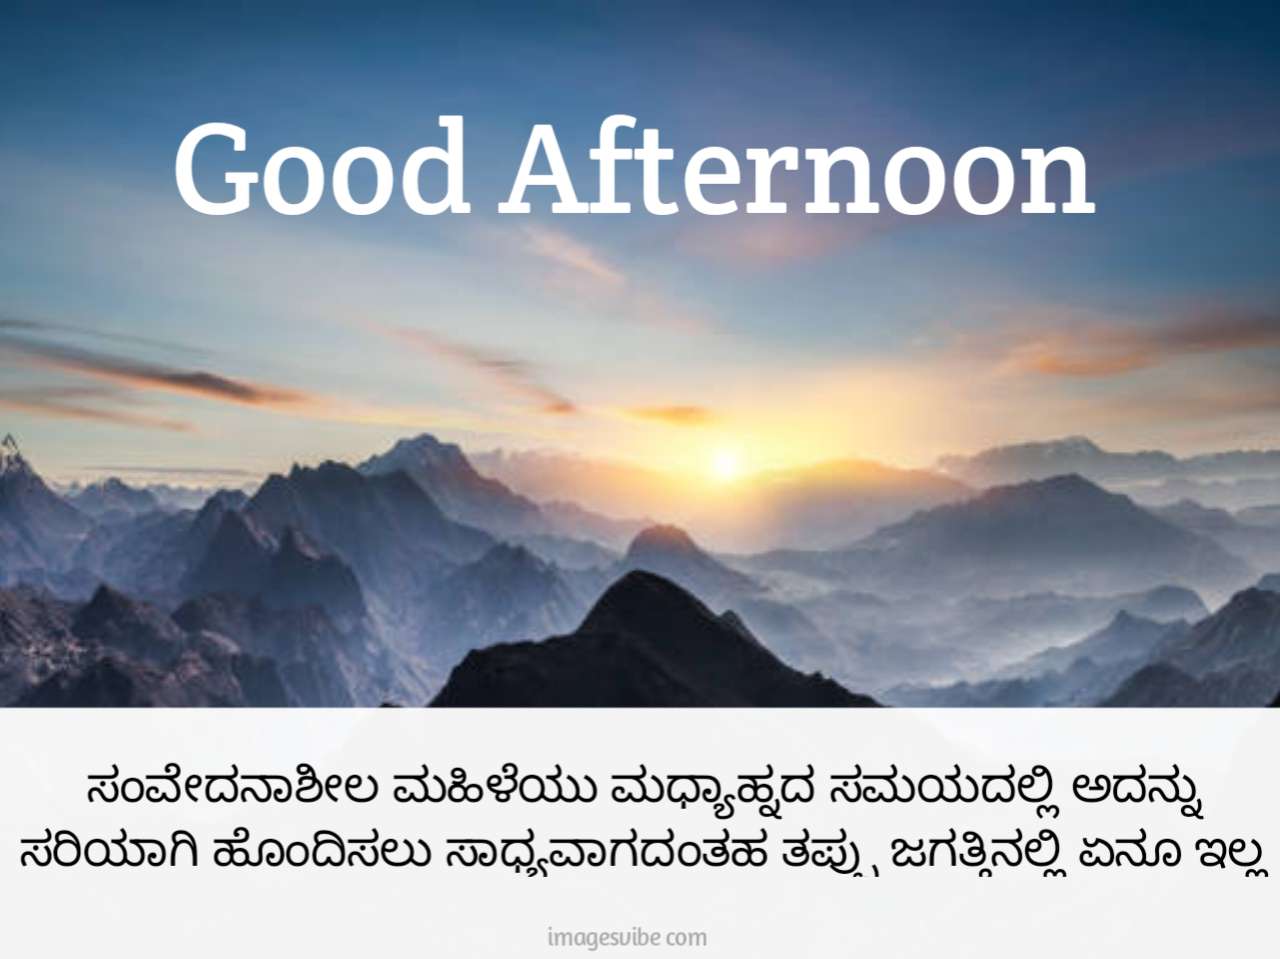 Beautiful Good Afternoon Kannada Images & Quotes in 2023 - Images Vibe